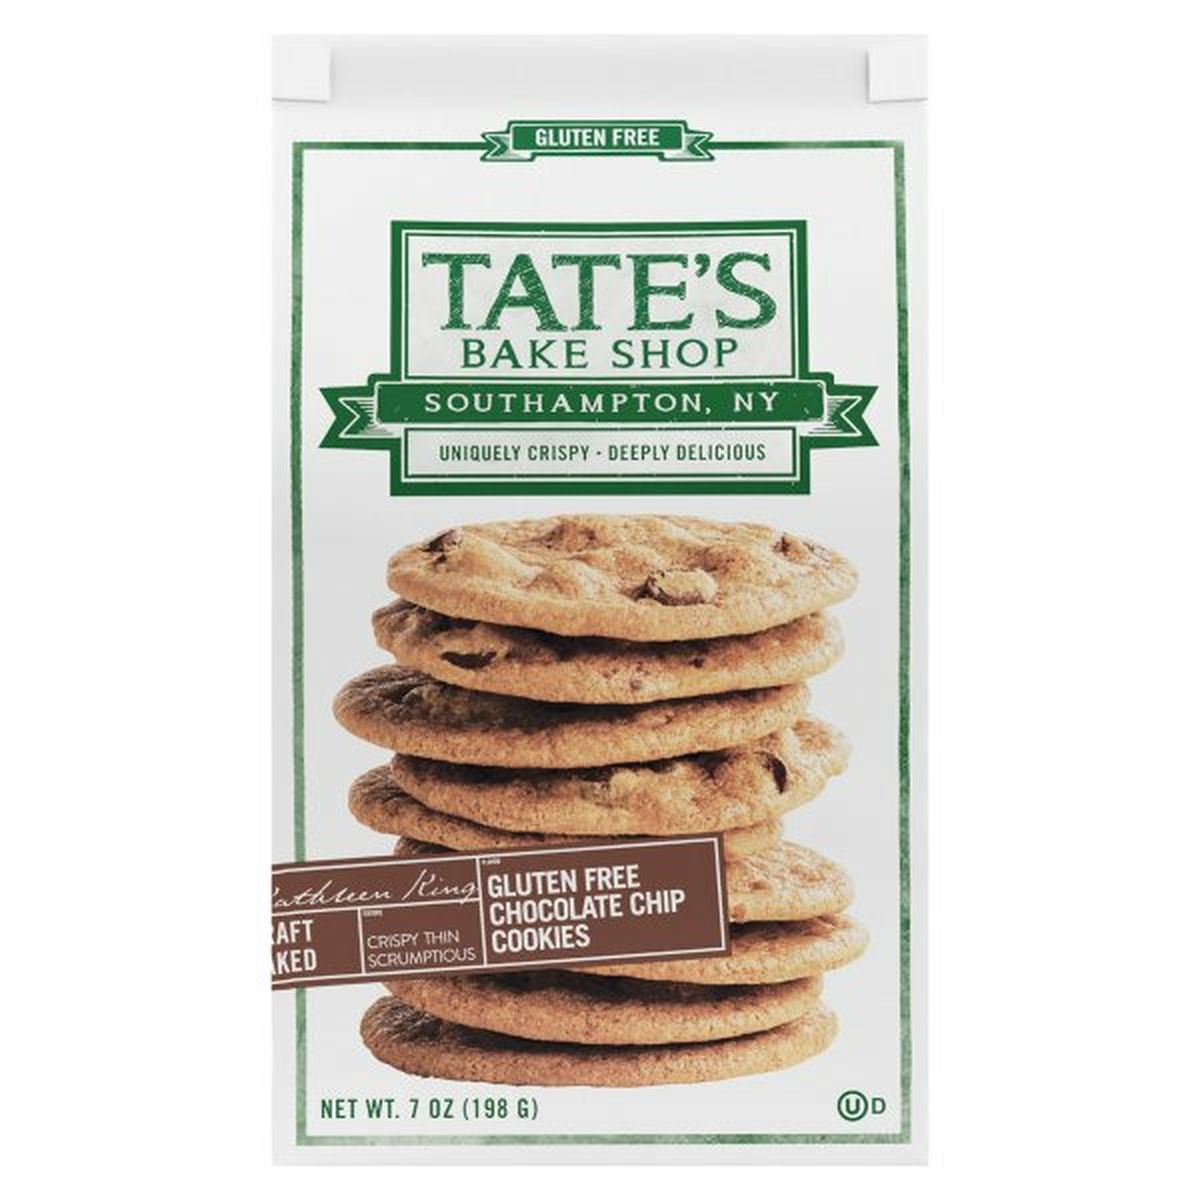 Calories in Tate's Bake Shop Cookies, Gluten Free, Chocolate Chip